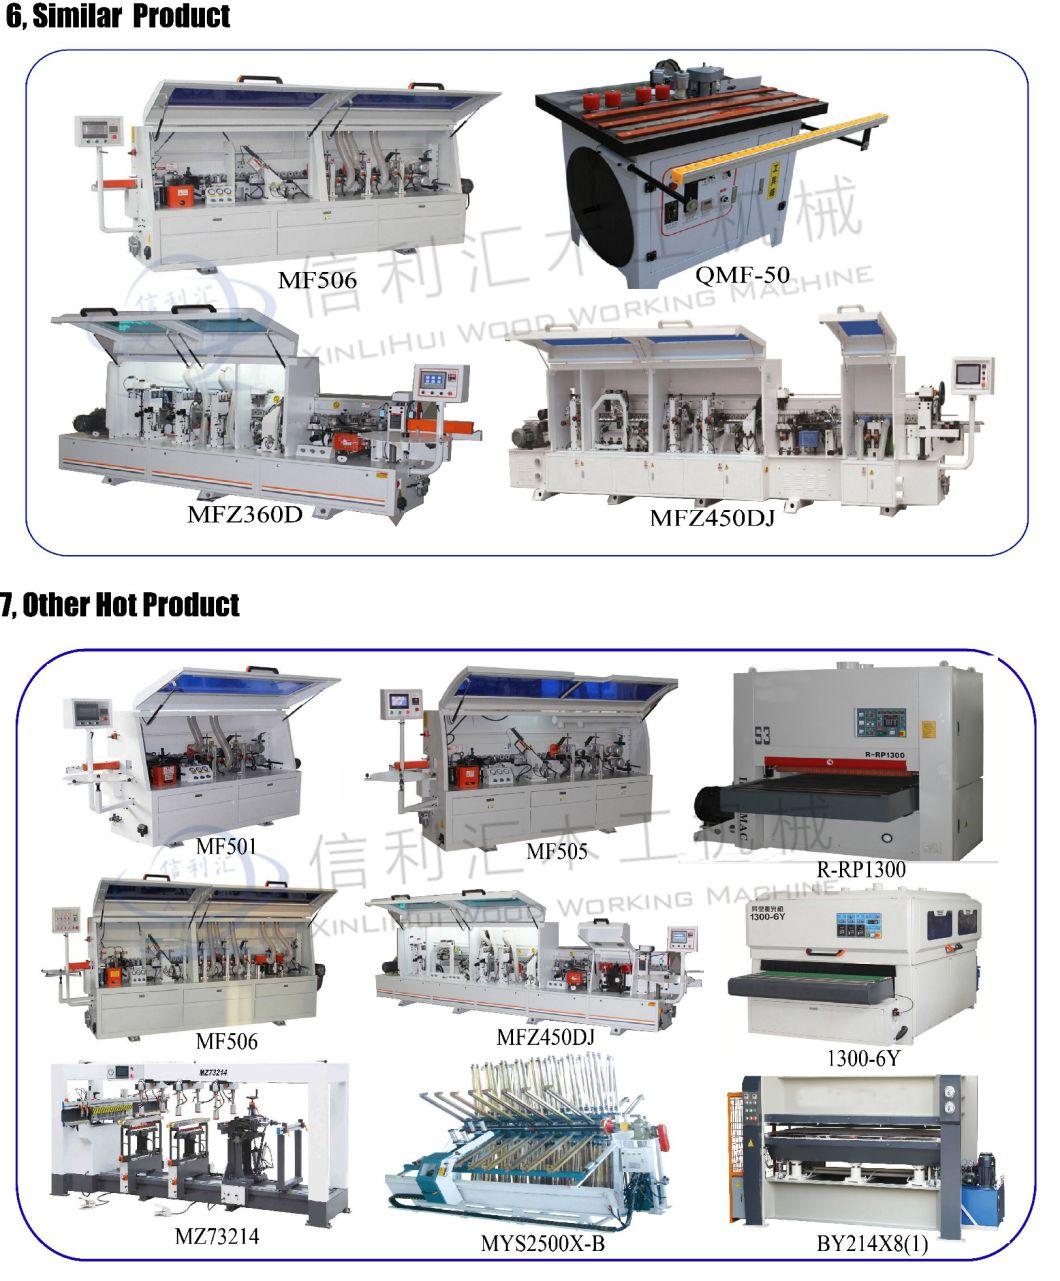 Industrial Vacuum Cleaner for Wood, Chipsaw, Dustwood, Flourwood, Dust Vacuum Dust or Wood Clip / Bits of Wood Packaging Machine